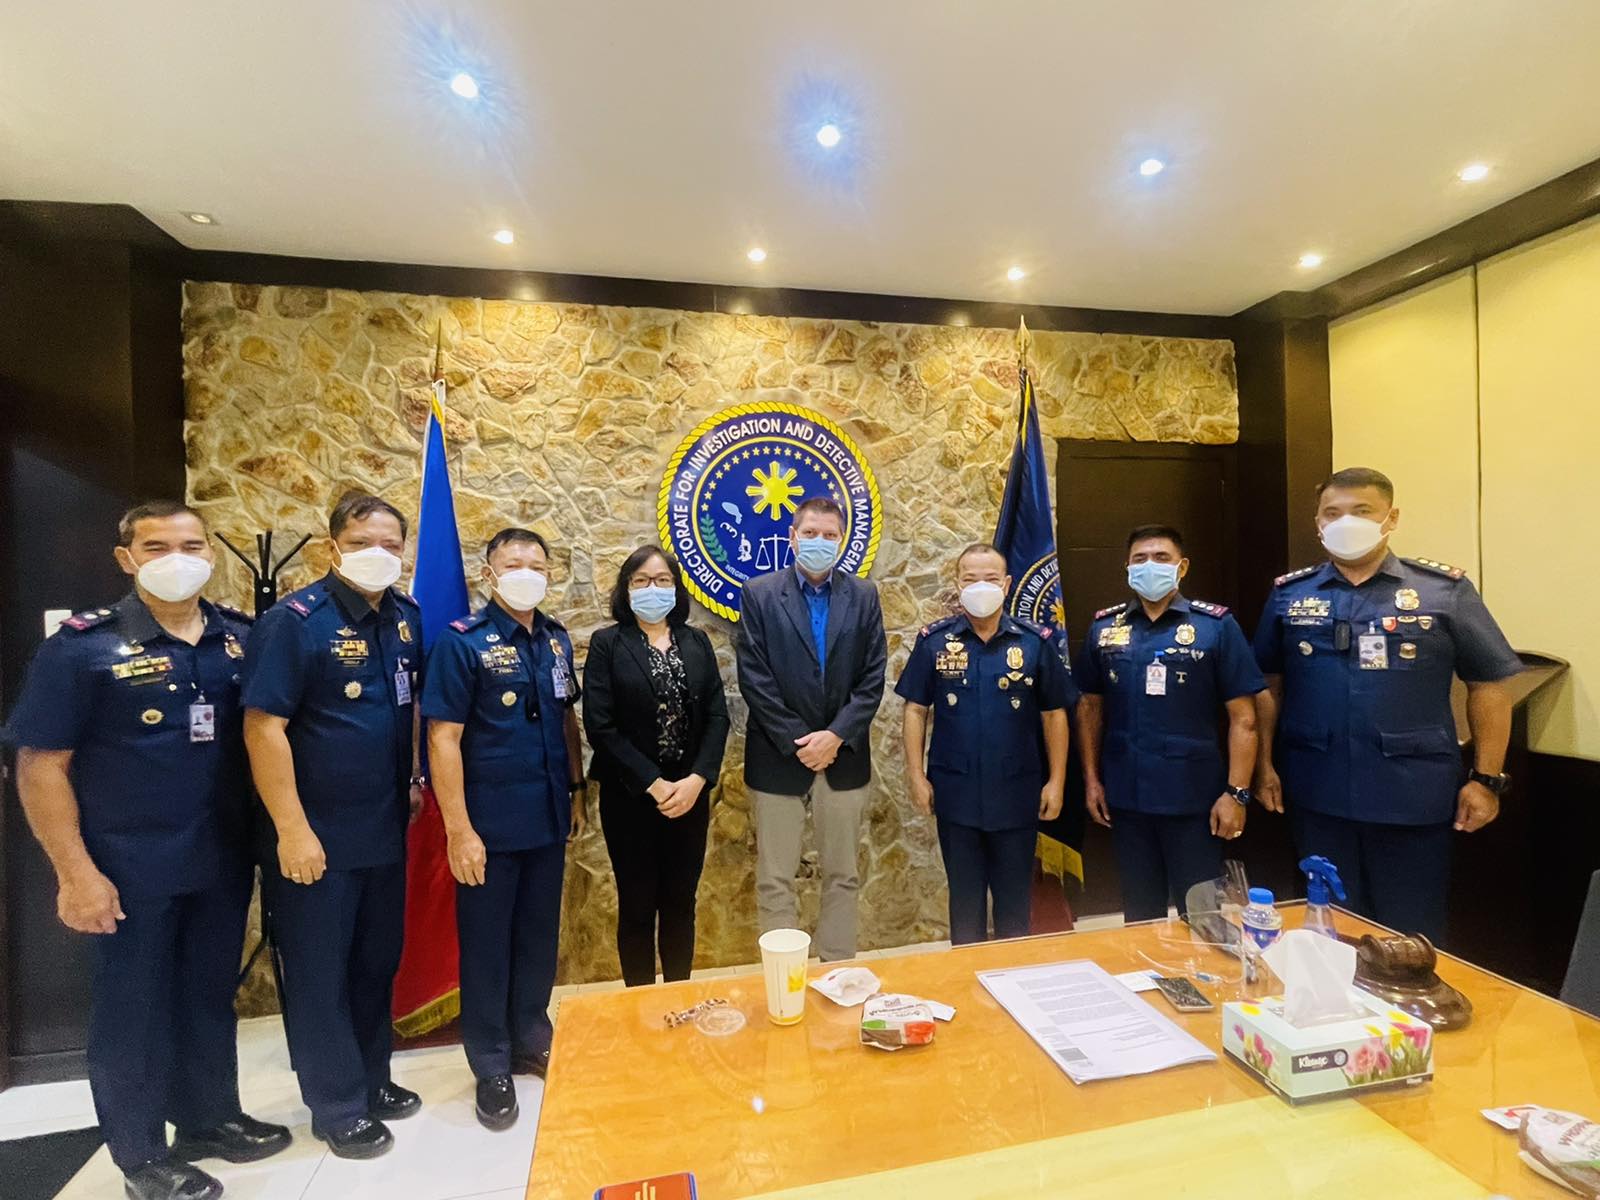 Courtesy Call of Hanns Seidel Foundation to PMGEN ARNEL B ESCOBAL, The Director for Investigation and Detective Management (TDIDM)